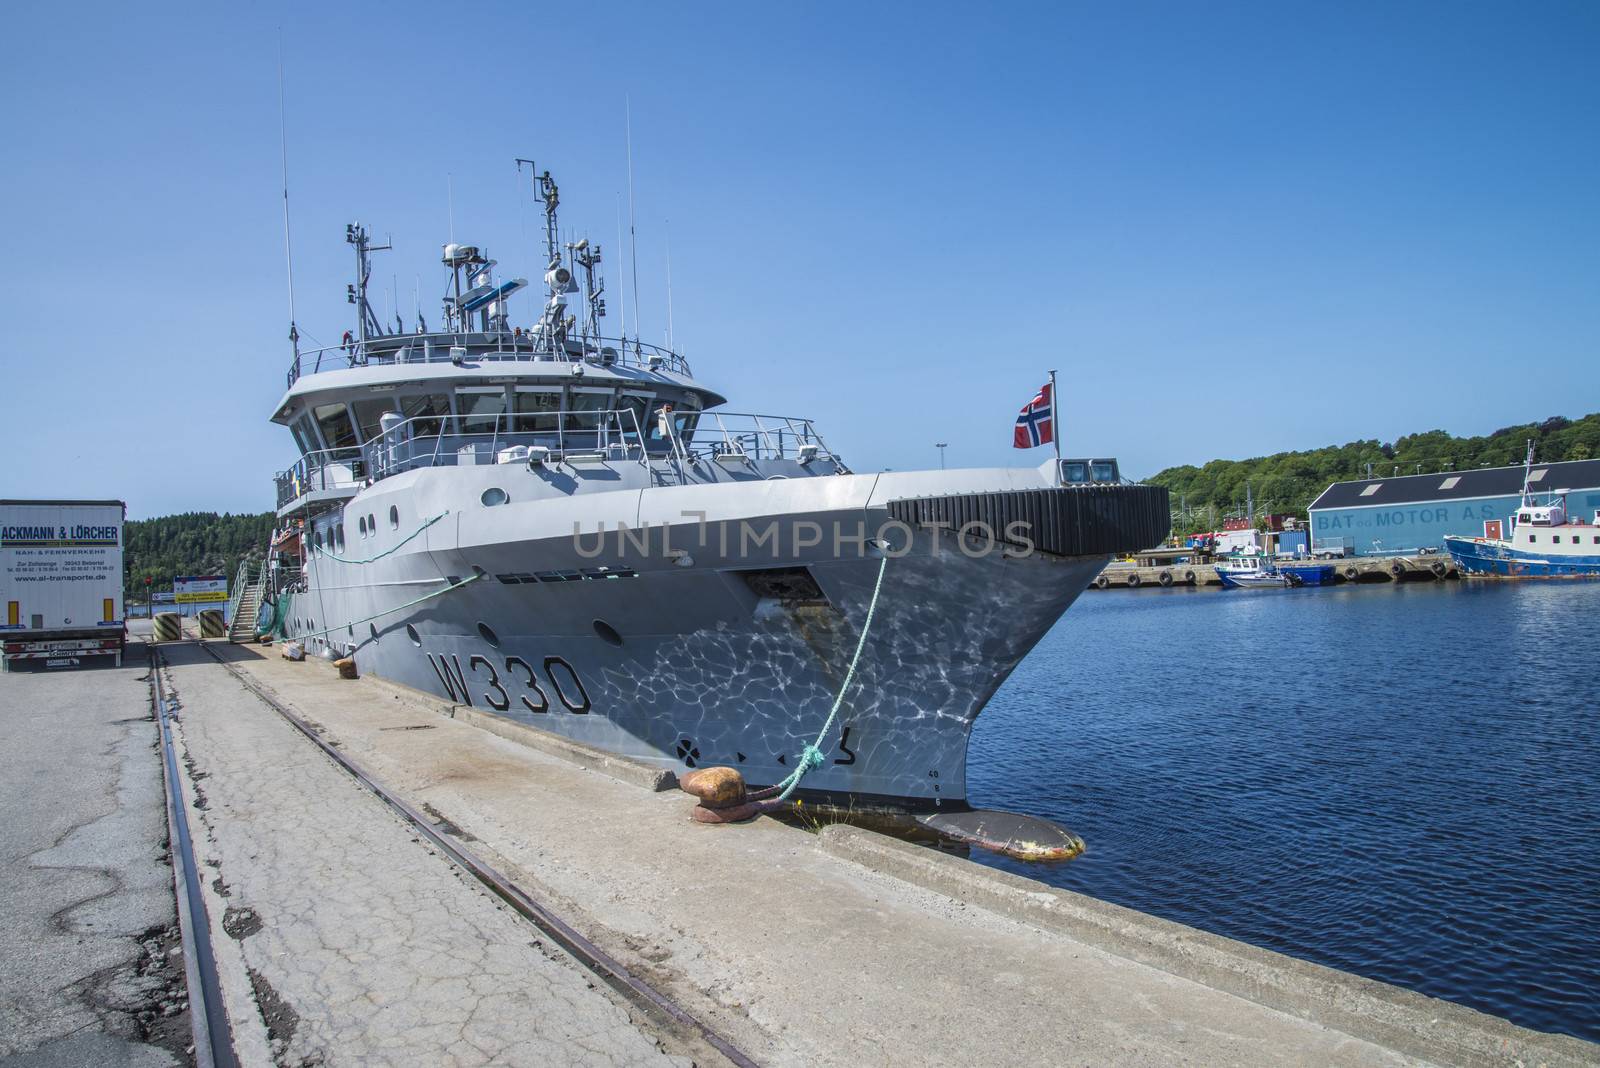 KV-Nornen, W 330 moored to the dock at the port of Halden, Norway